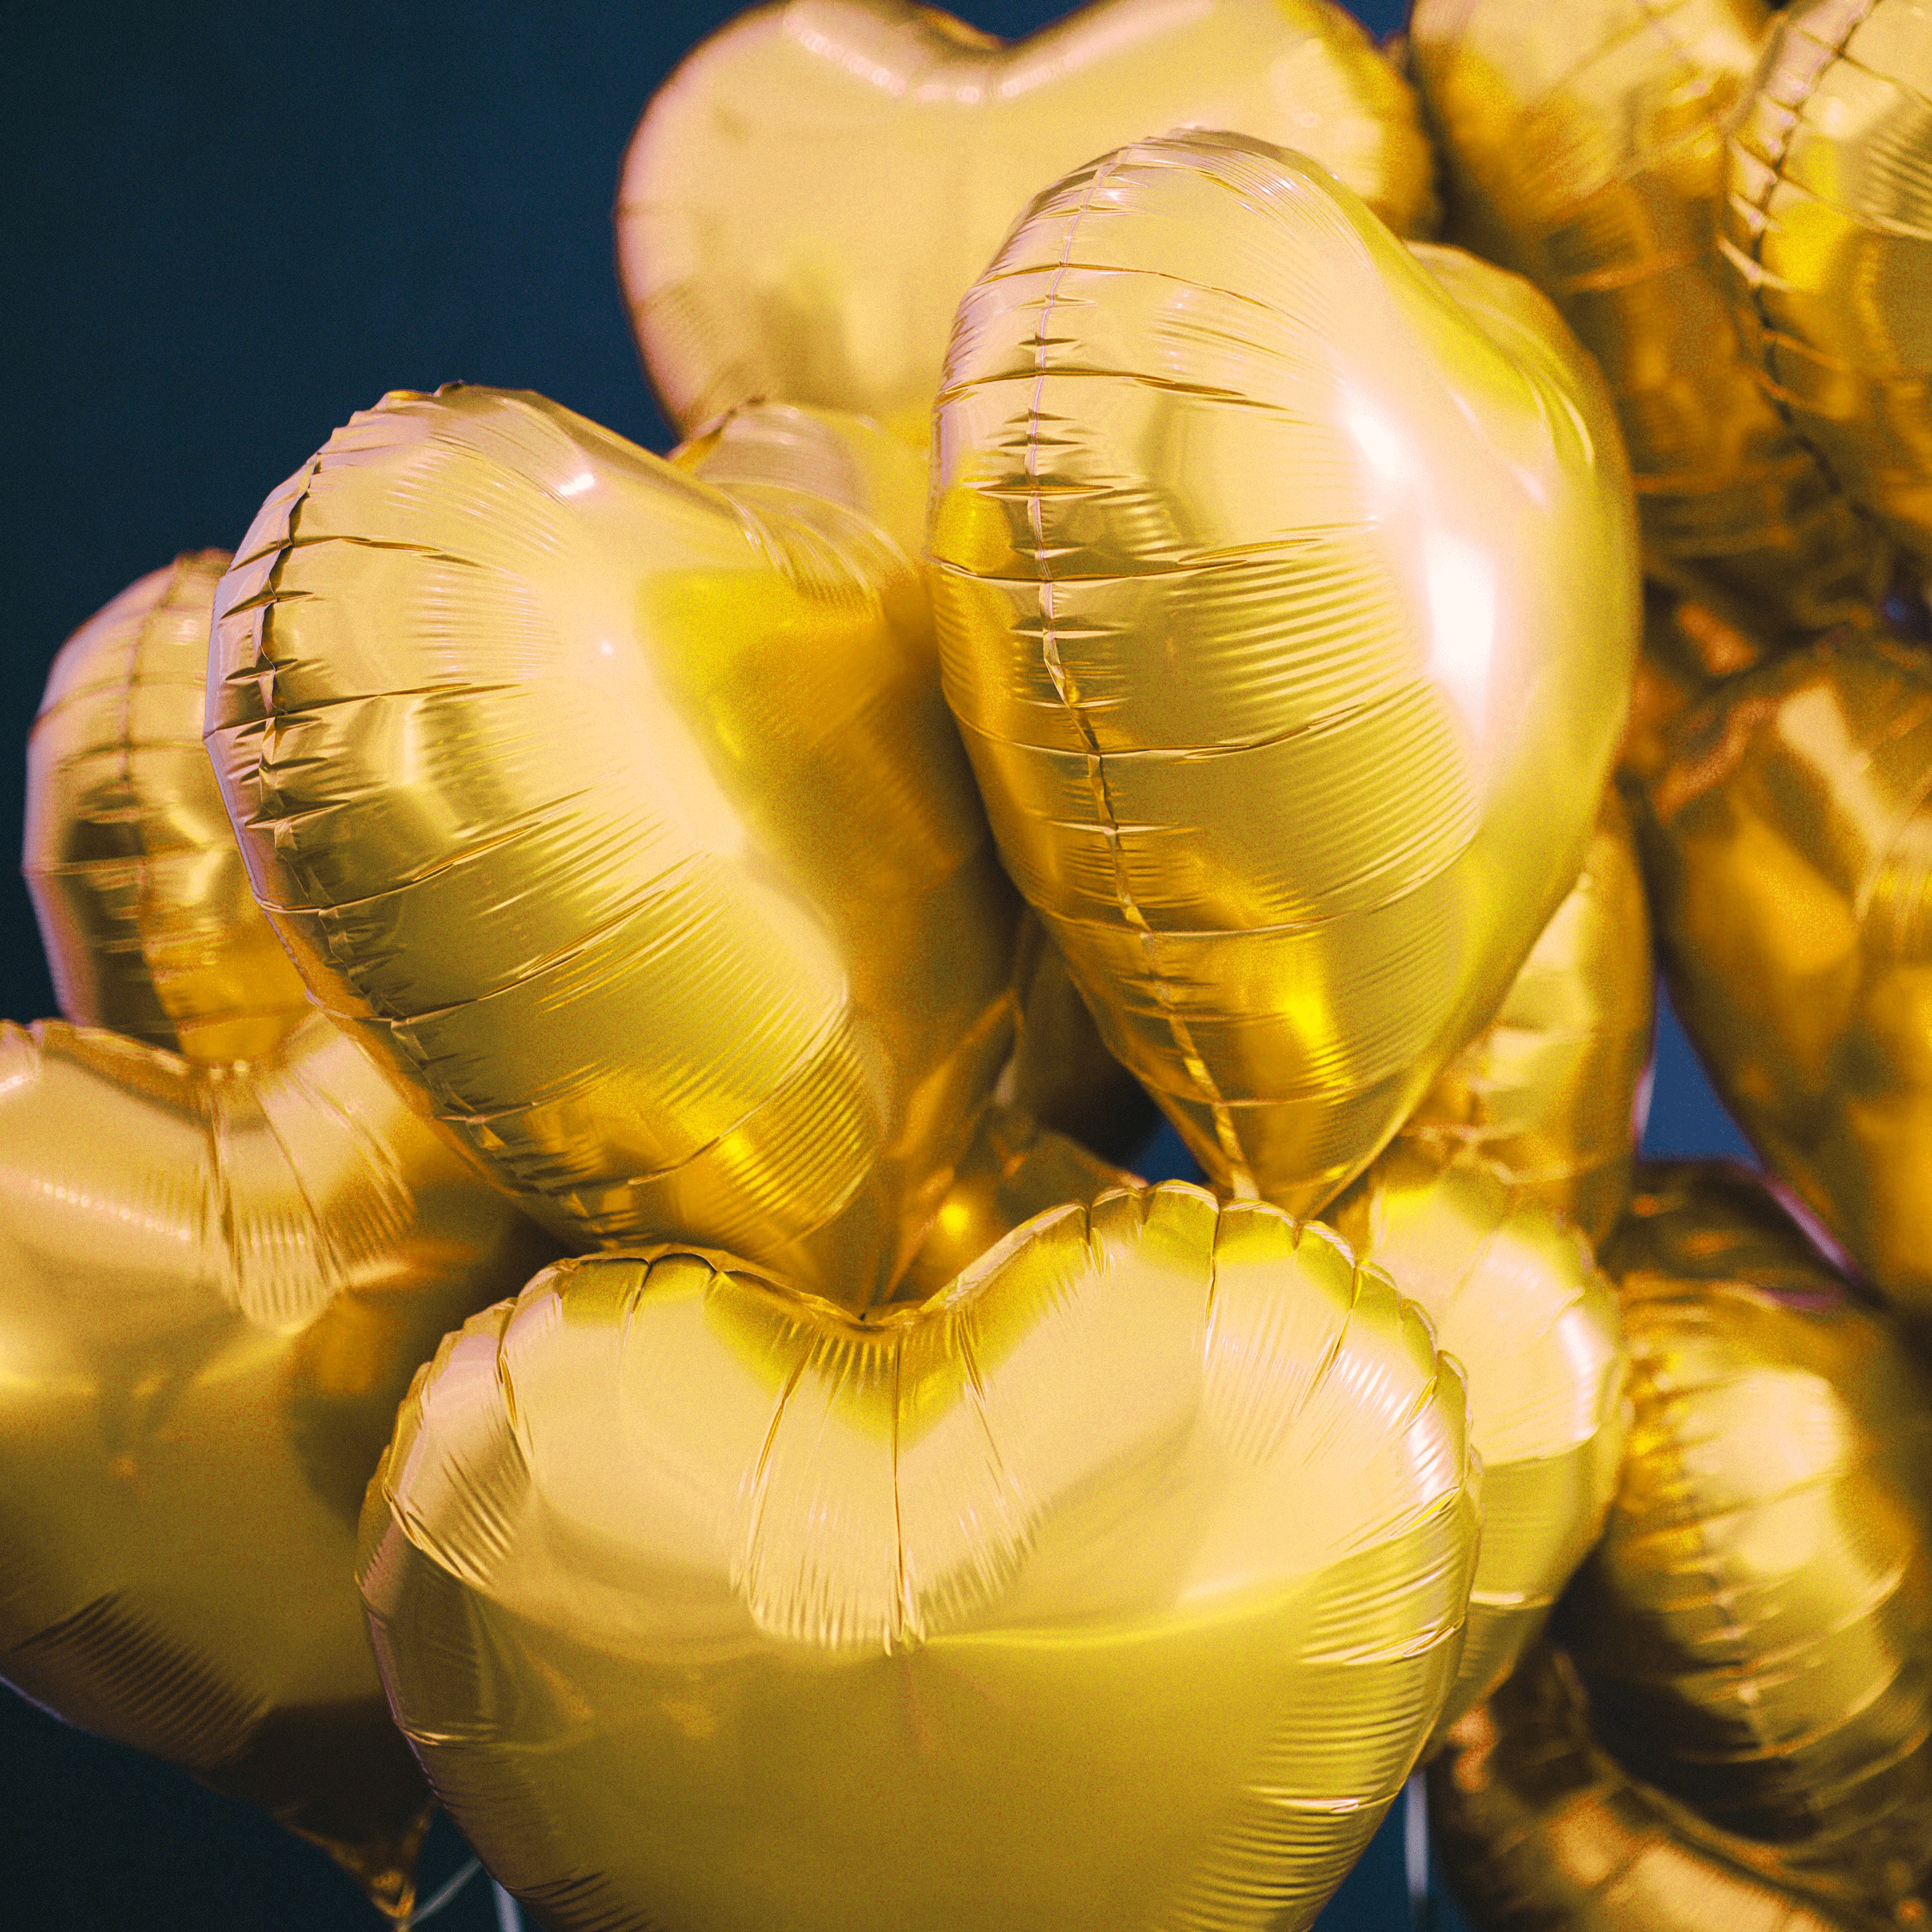 The Magic Balloons Store-18″ Gold Heart Foil Balloon ( Pack of 3)